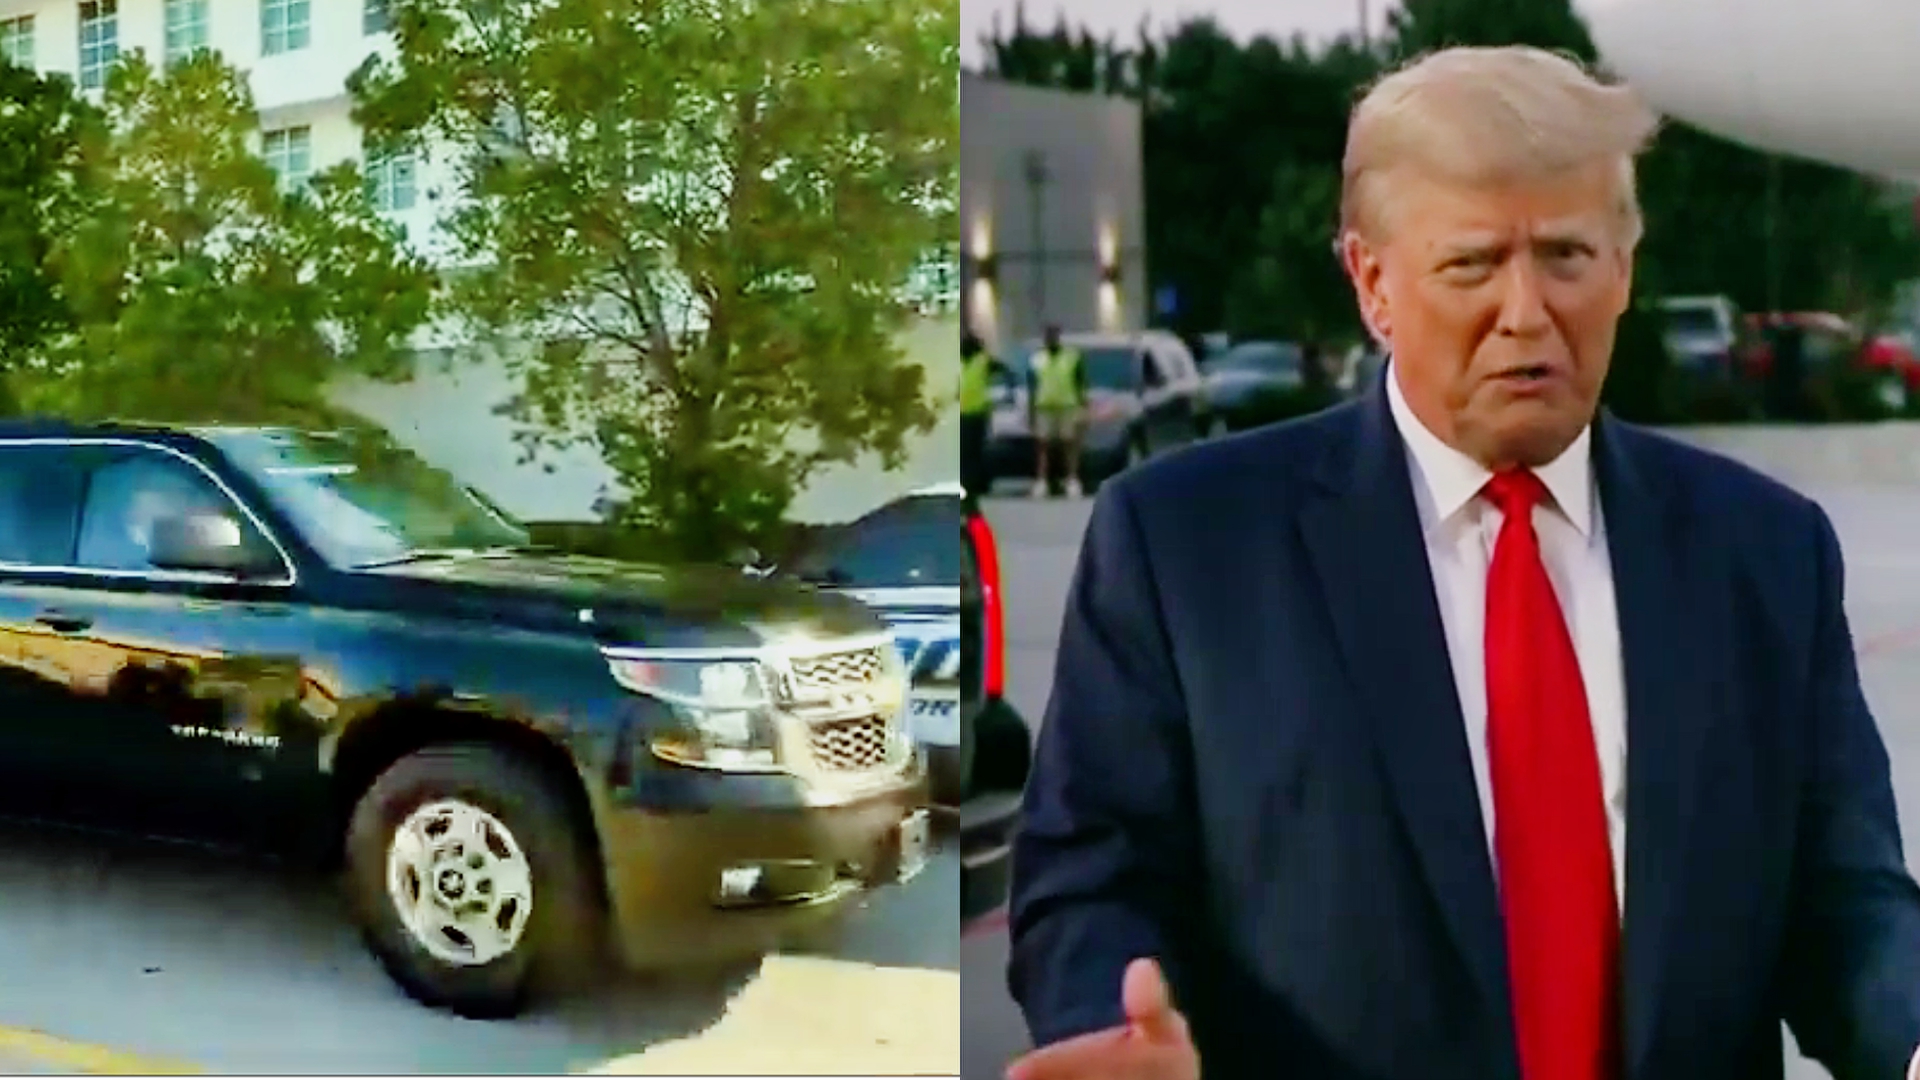 Trump Shows Up To Court For Private Huddle With Legal Team and Trump-Appointed Judge Over Classified Evidence